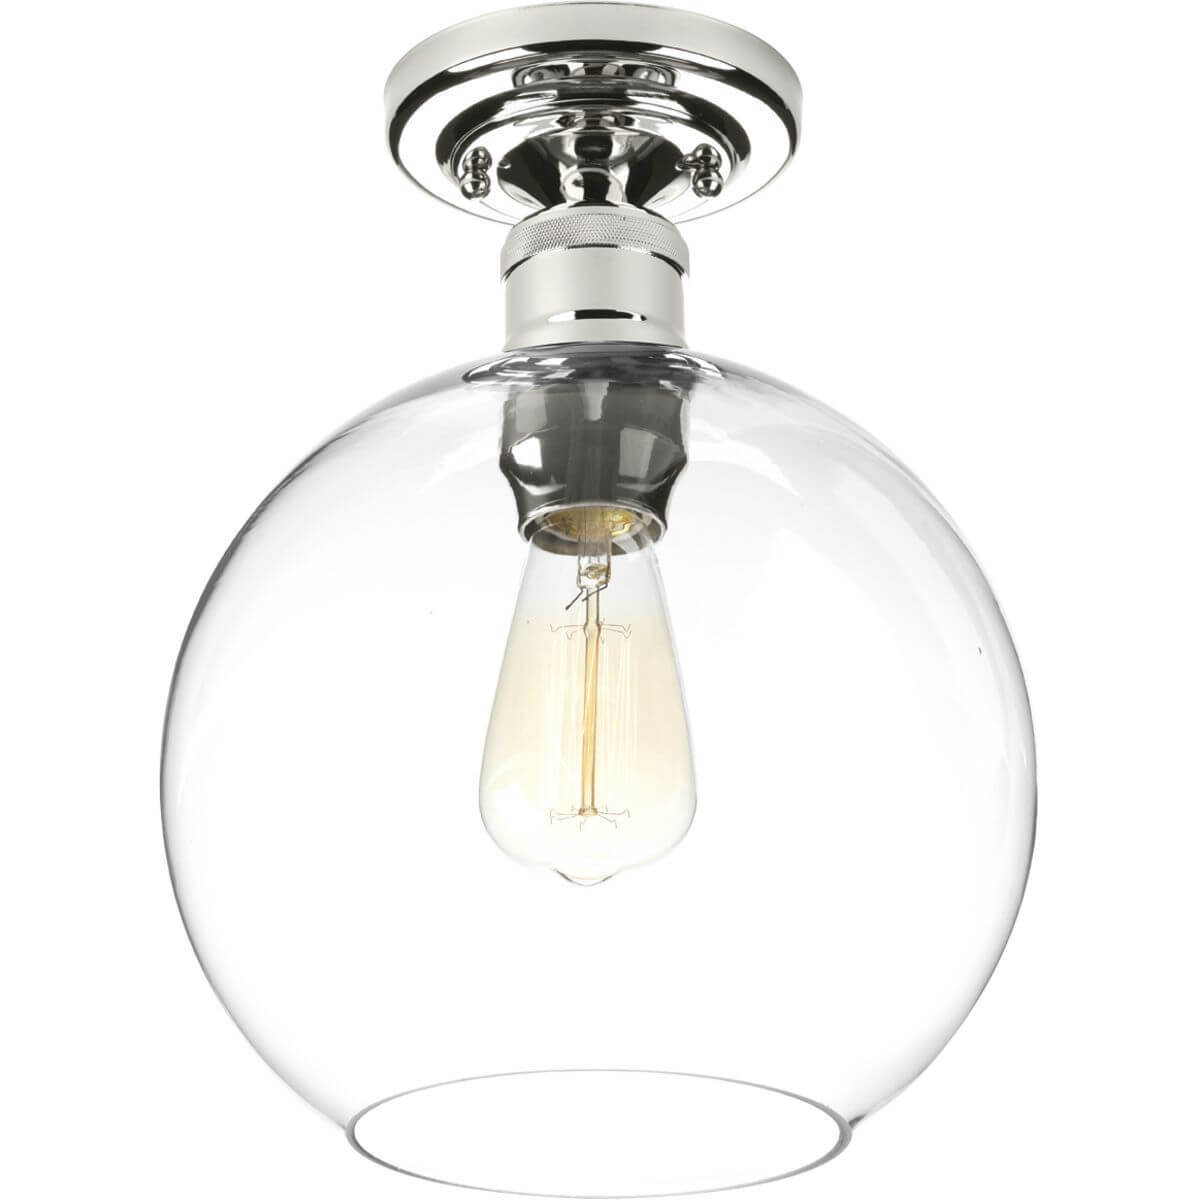 Progress Lighting P350046-104 Hansford 1 Light 10 inch Flush Mount in Polished Nickel with Clear Glass